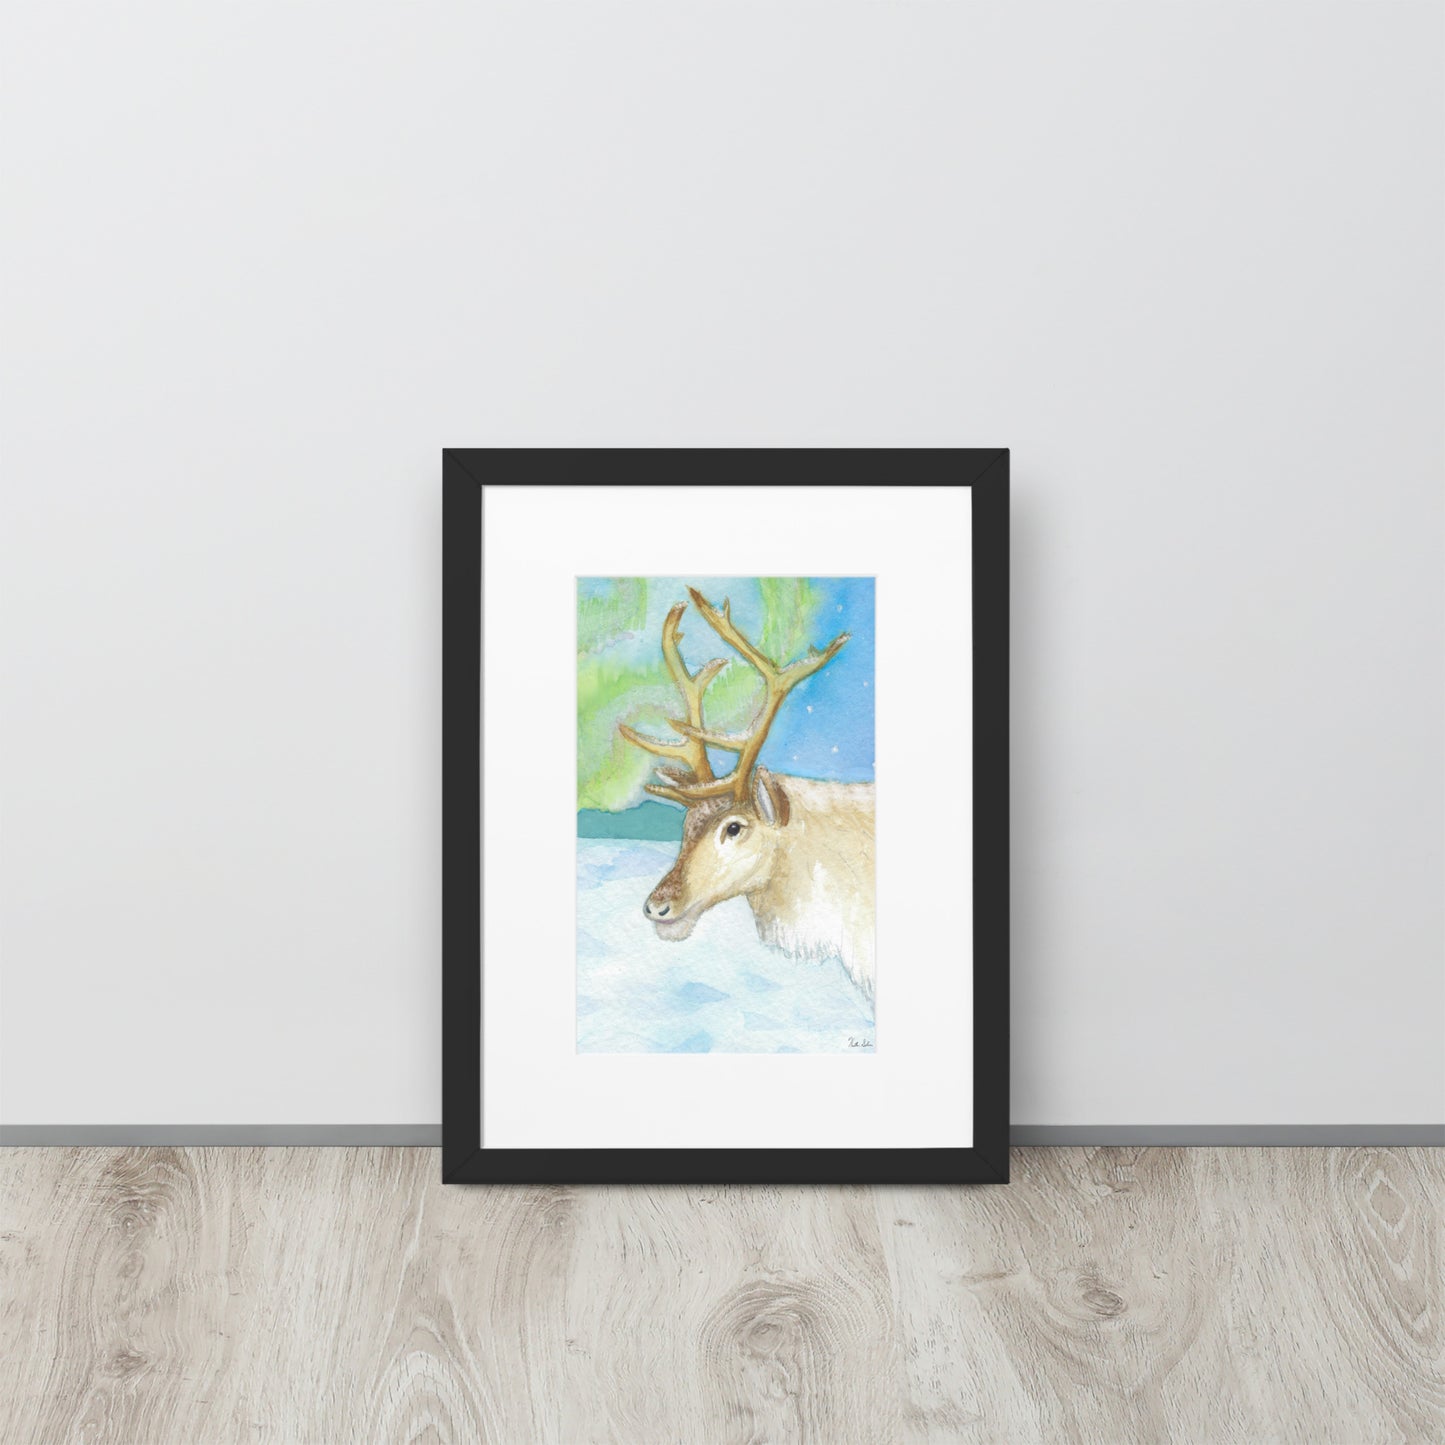 30 by 40 cm art print of a watercolor reindeer in the snow against the northern lights. Framed by a white mat and black ayous wood frame. Has acrylite cover and hanging hardware. Digitally signed by the artist, Heather Silver. Shown leaning against wall on wooden floor.